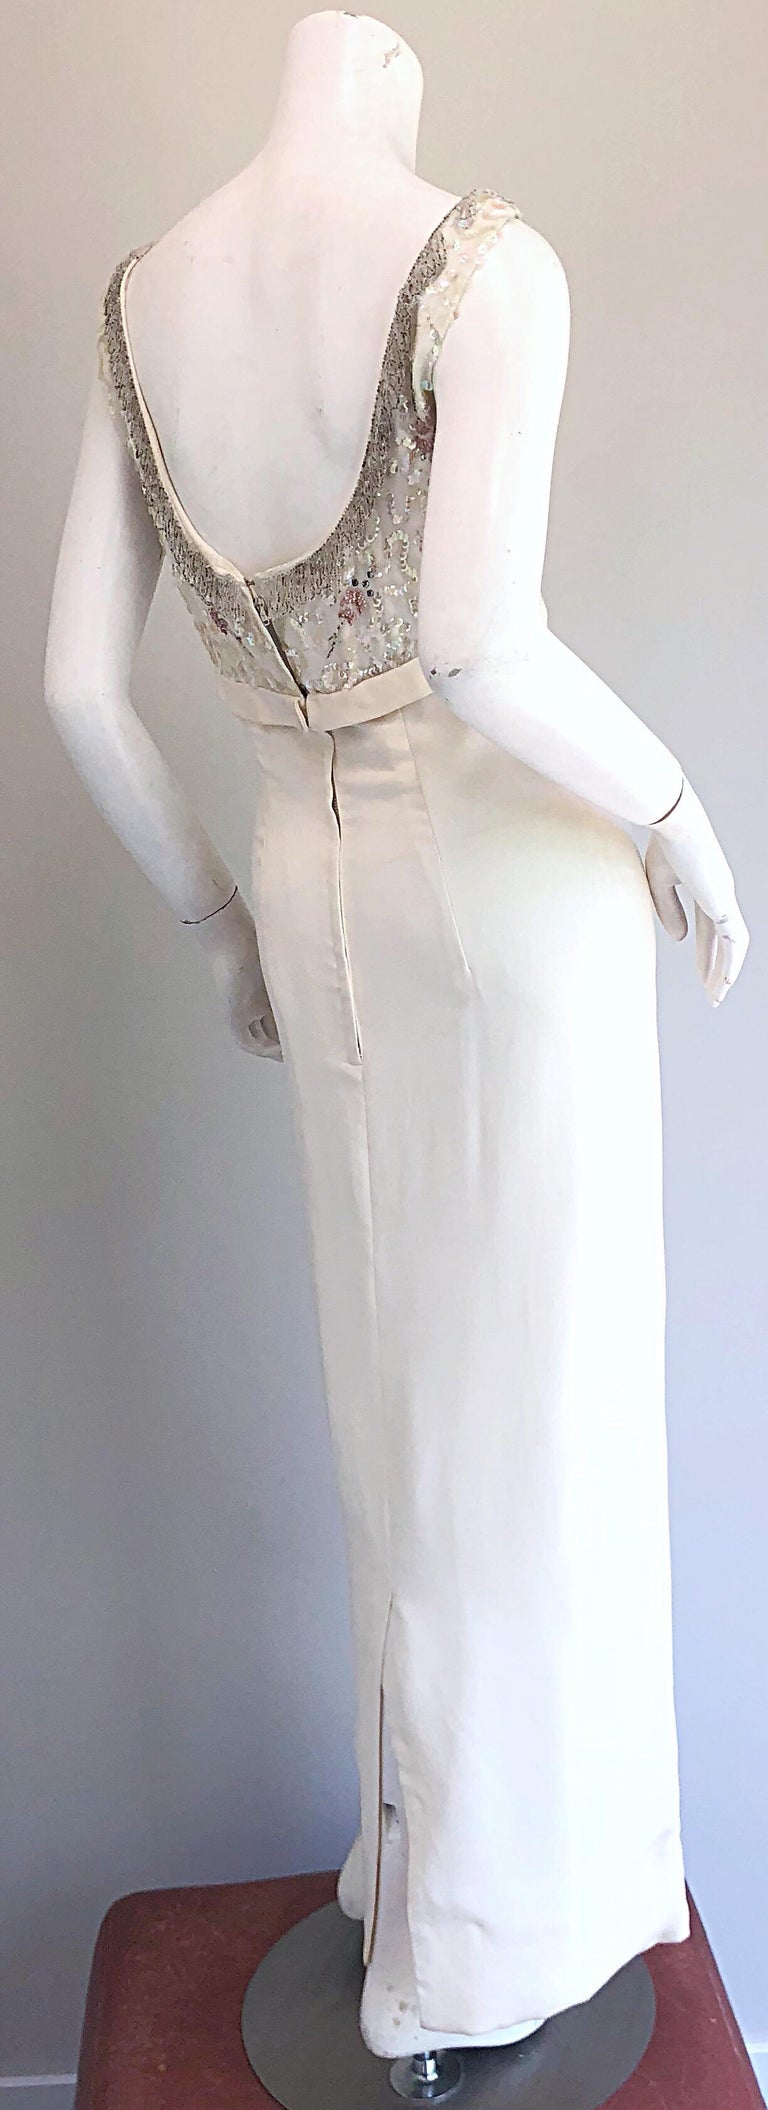 Gorgeous 1960s White Sequin Beaded Vintage Crepe 60s Evening Gown Dress ...